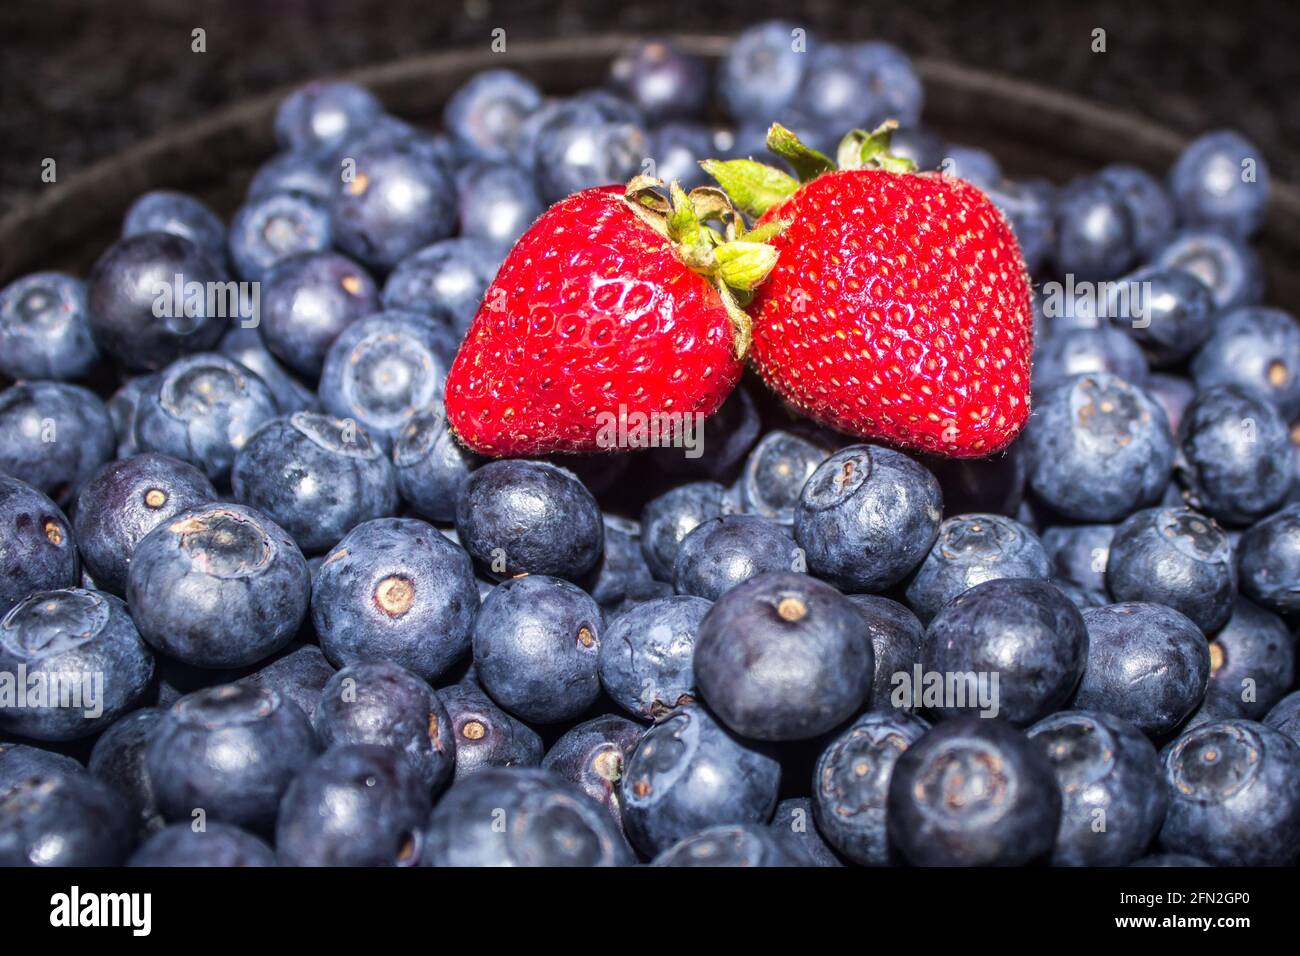 Two bright red strawberries on a large amount of blue berries Stock Photo